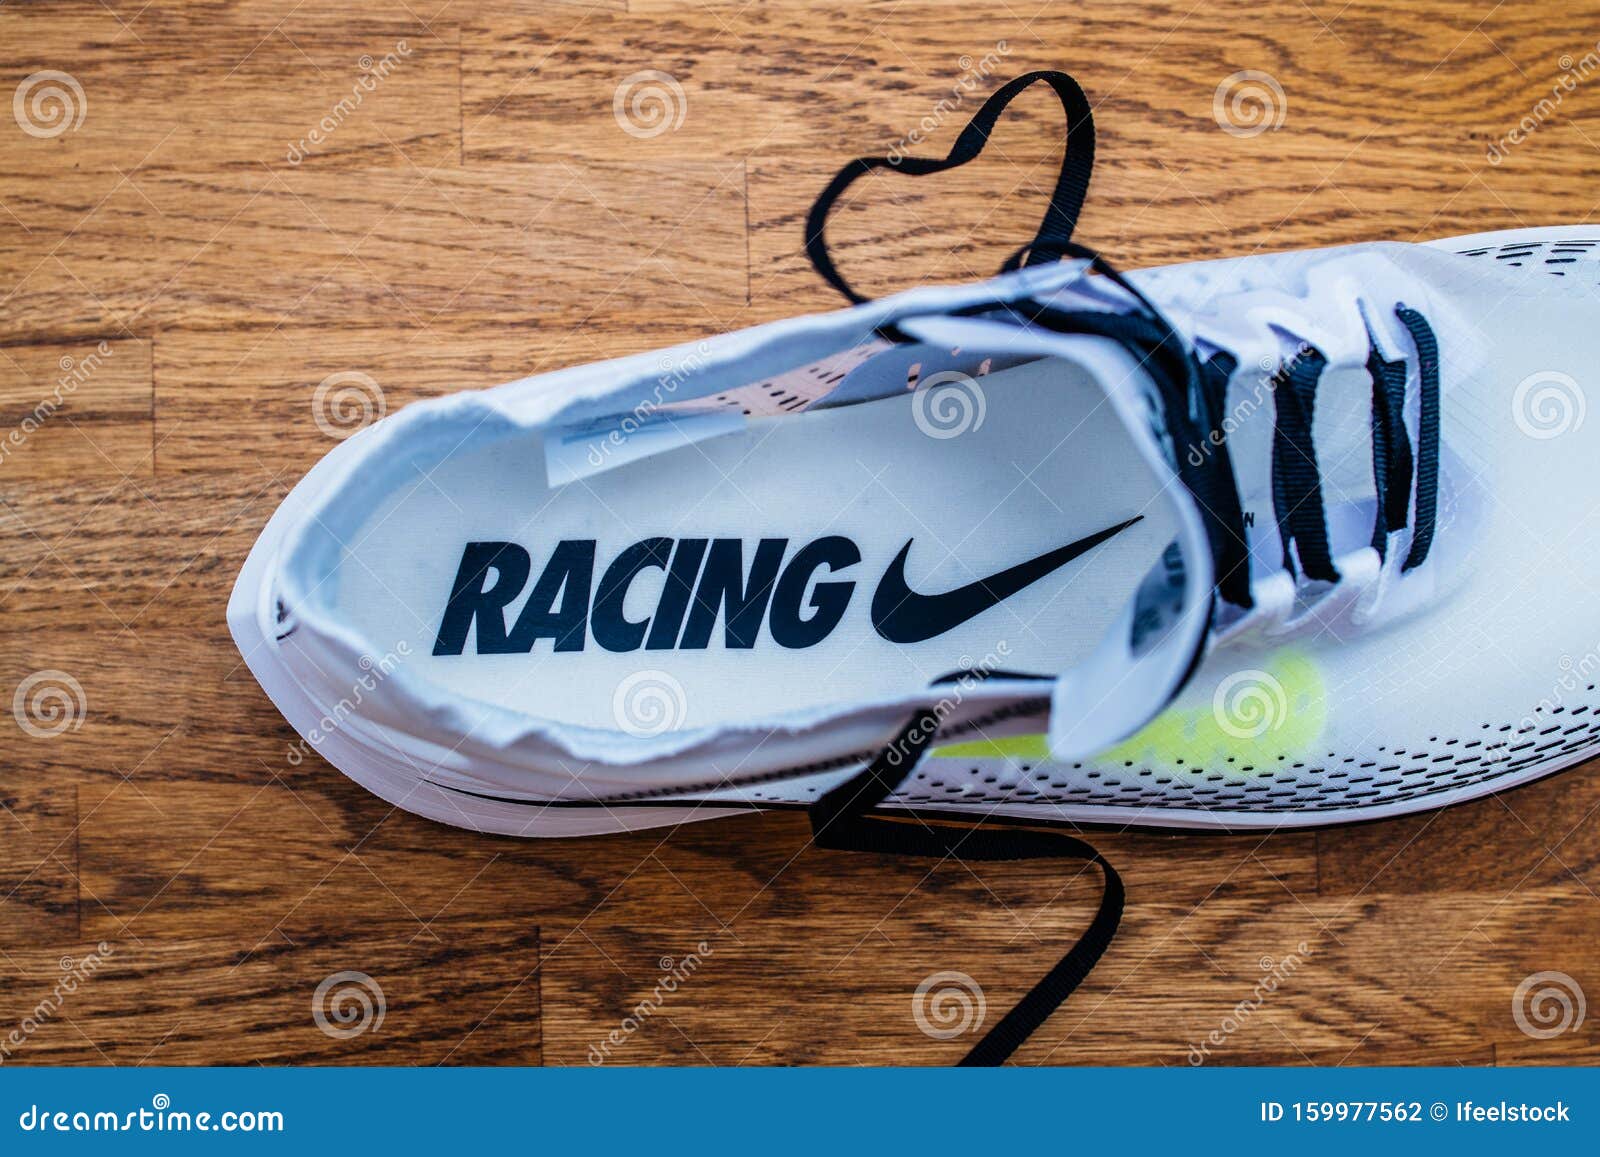 Racing Inscription on the Sole of Nike Sport Shoes Editorial Photography -  Image of professional, fashioned: 159977562